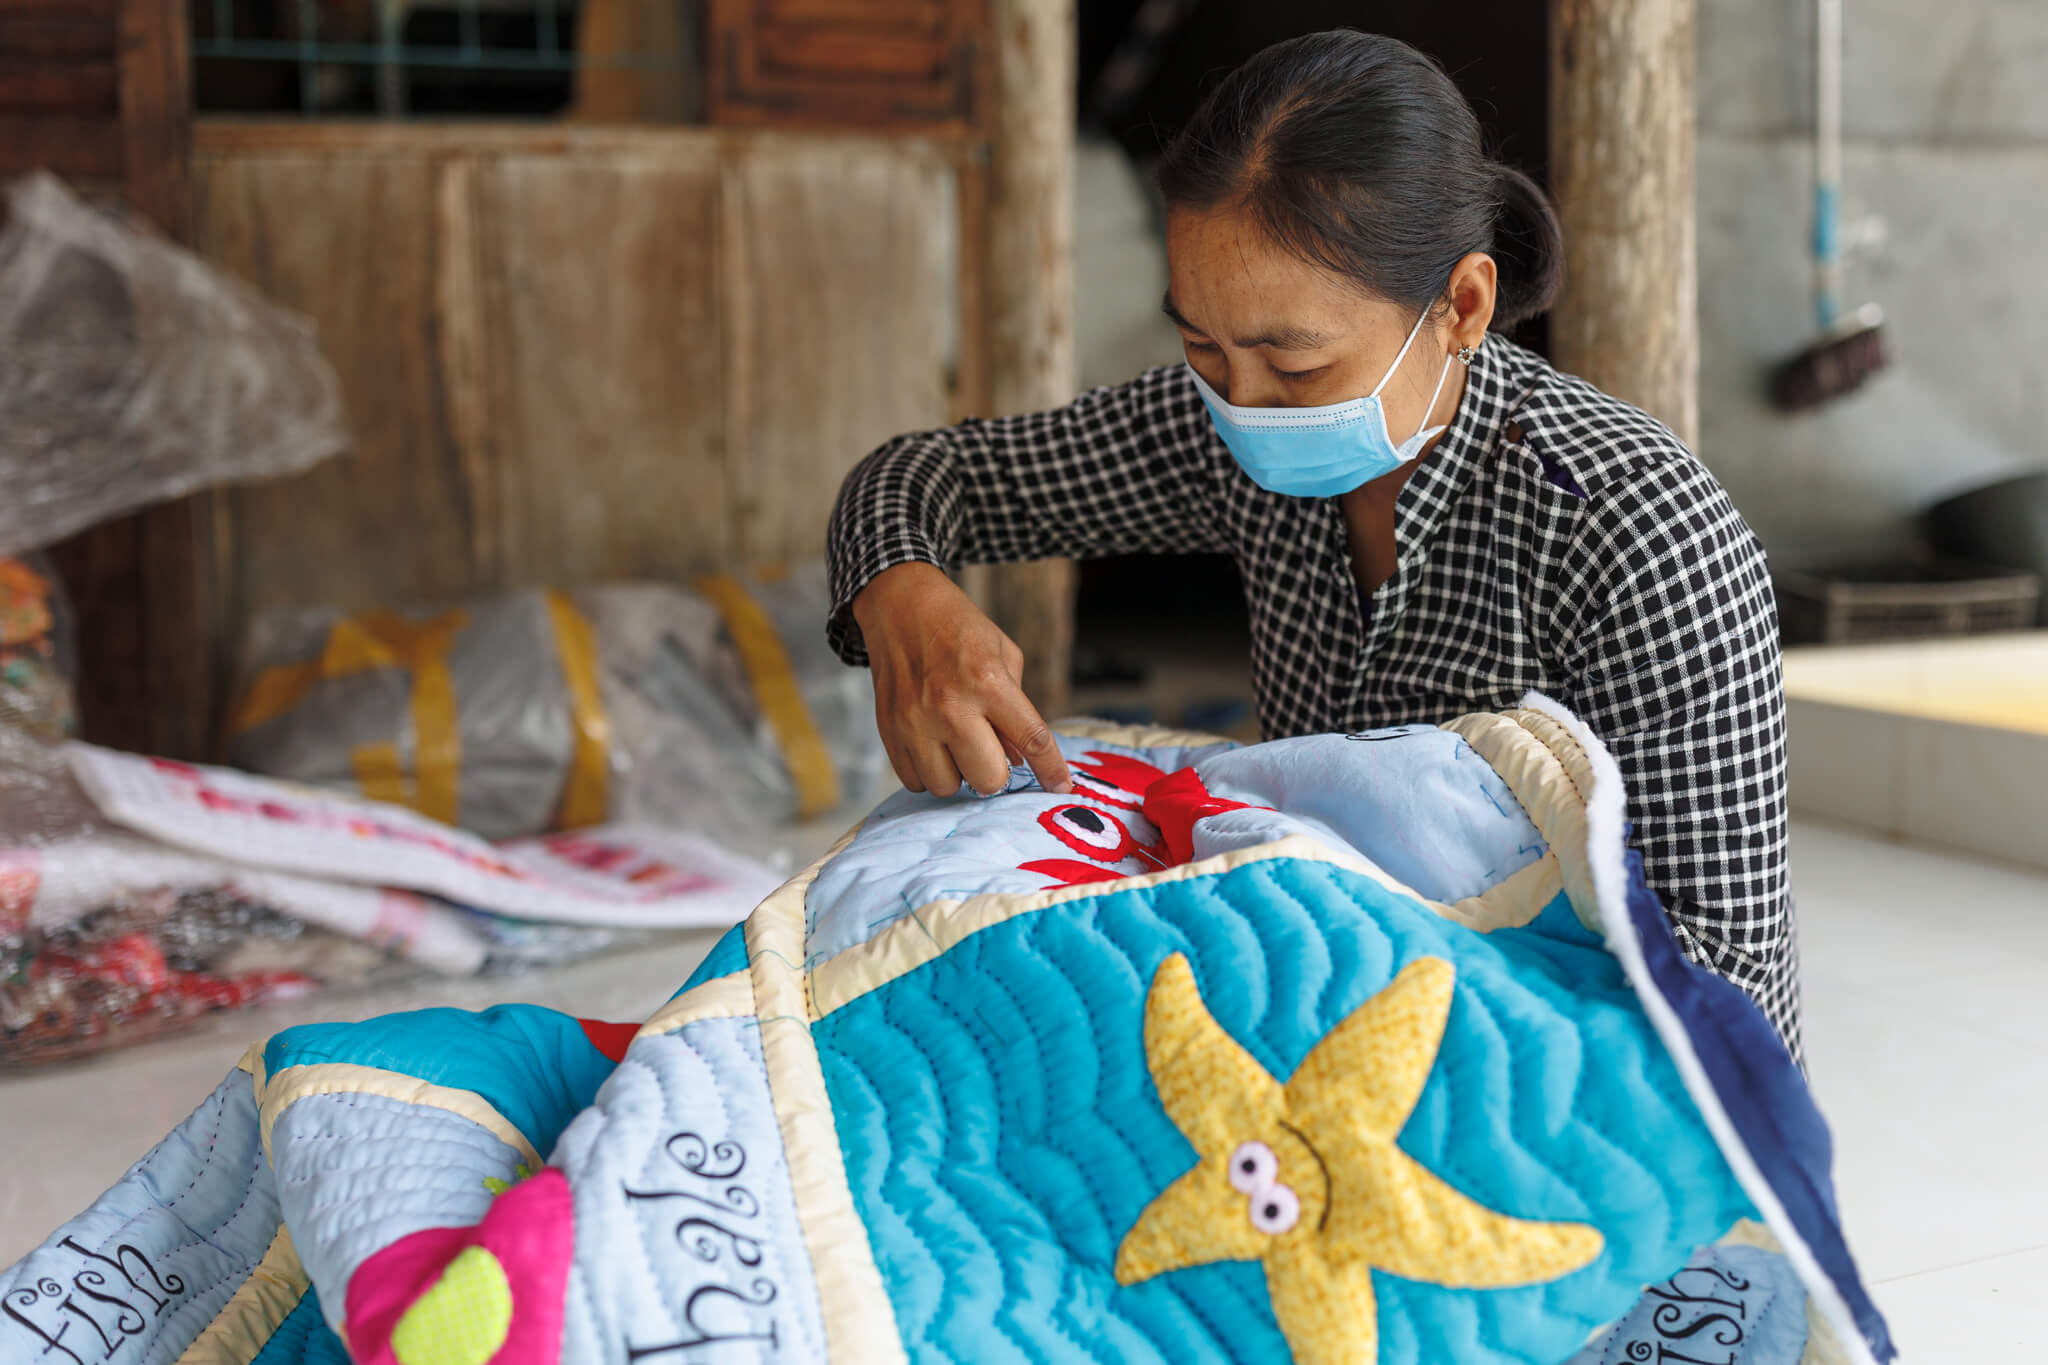 A woman works on a quilt in the Mekong Delta